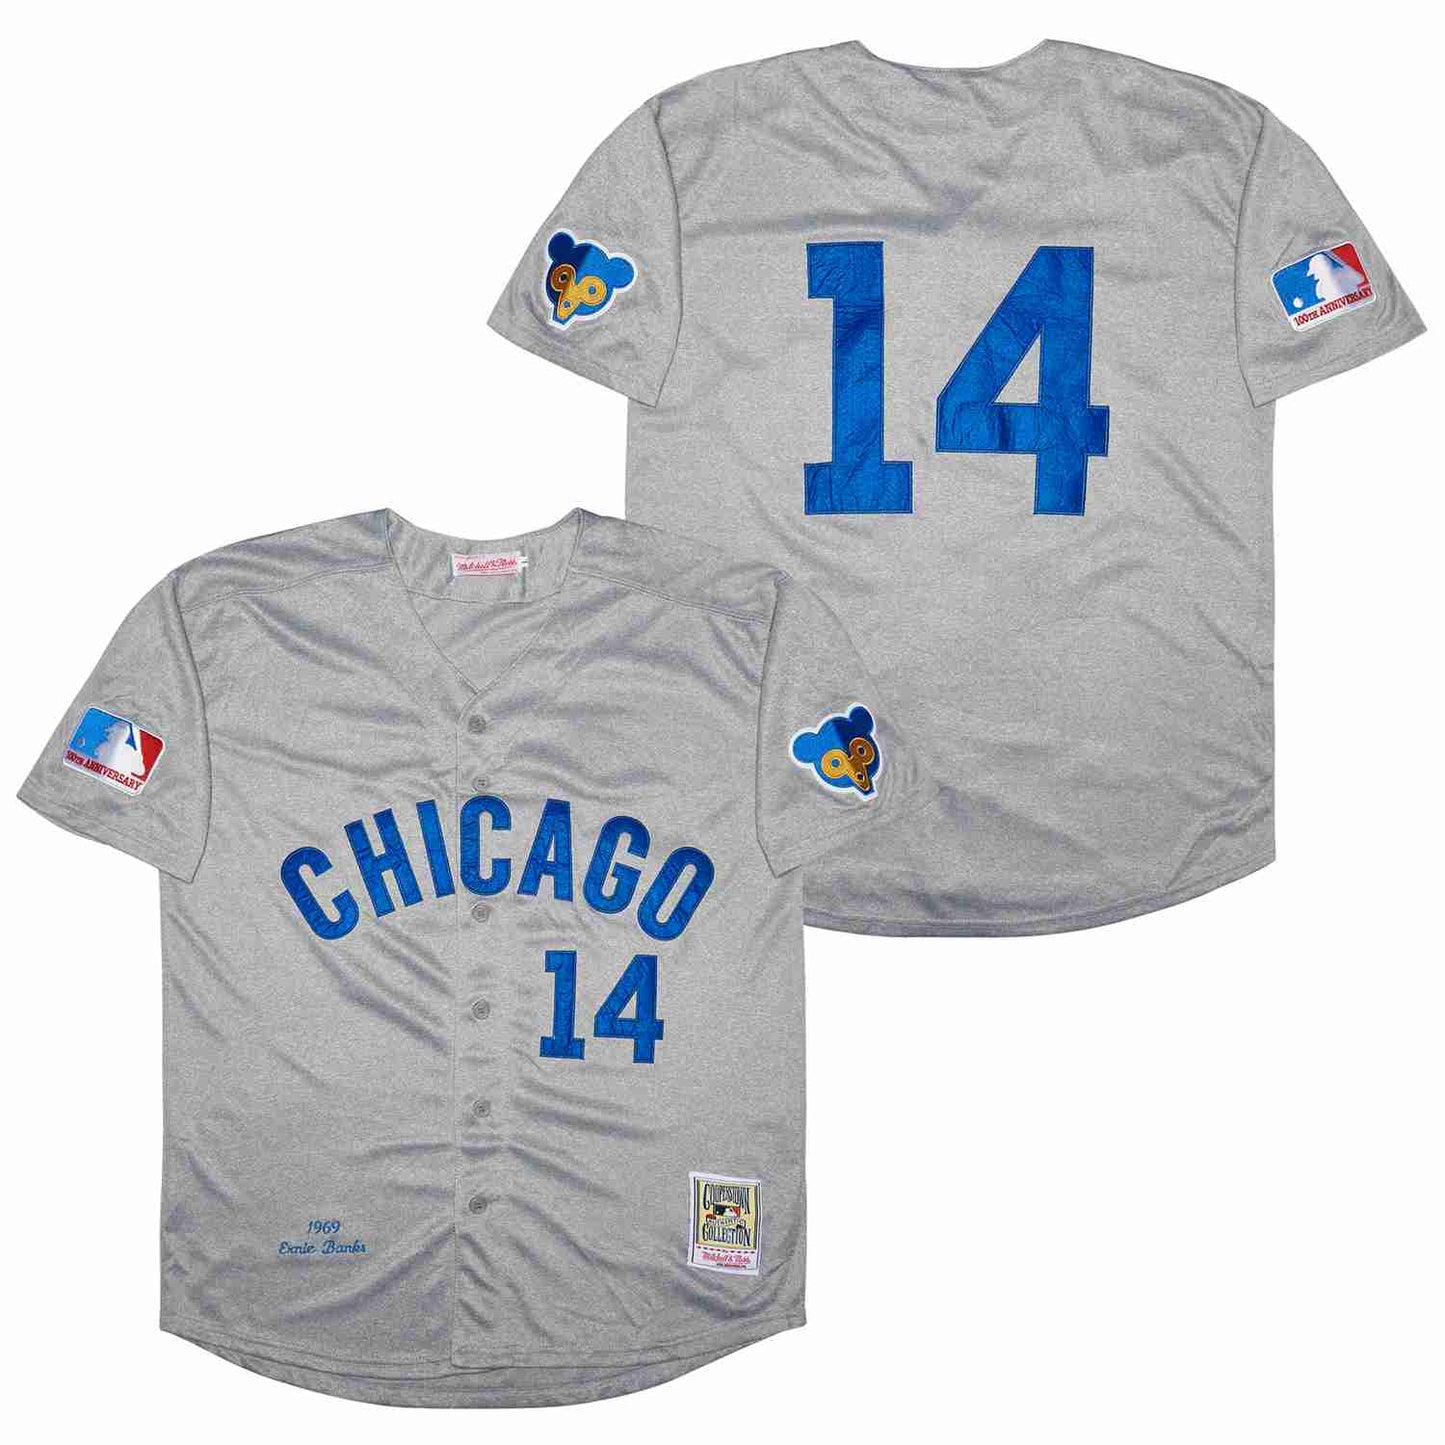 Chicago Cubs Ernie Banks 1969 MLB Mitchell Ness Cooperstown Classic Jersey - Gray & Blue